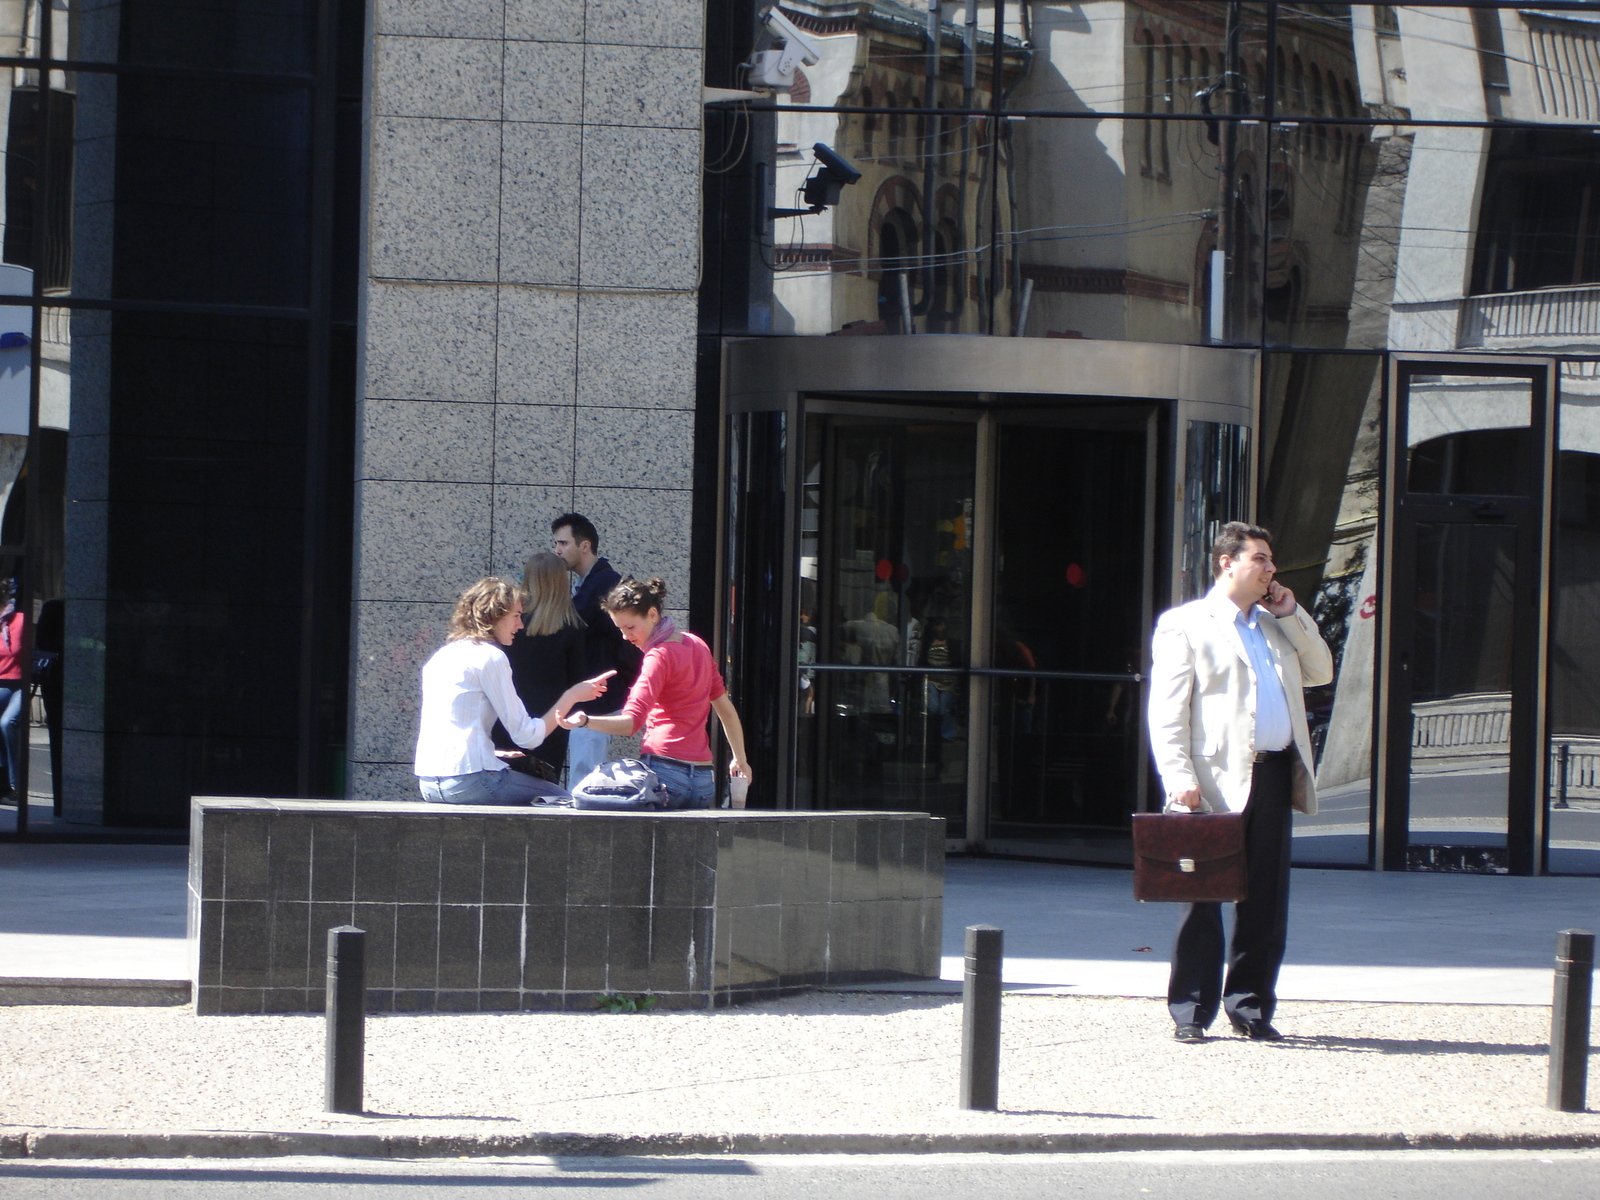 a man and three people standing around outside a building